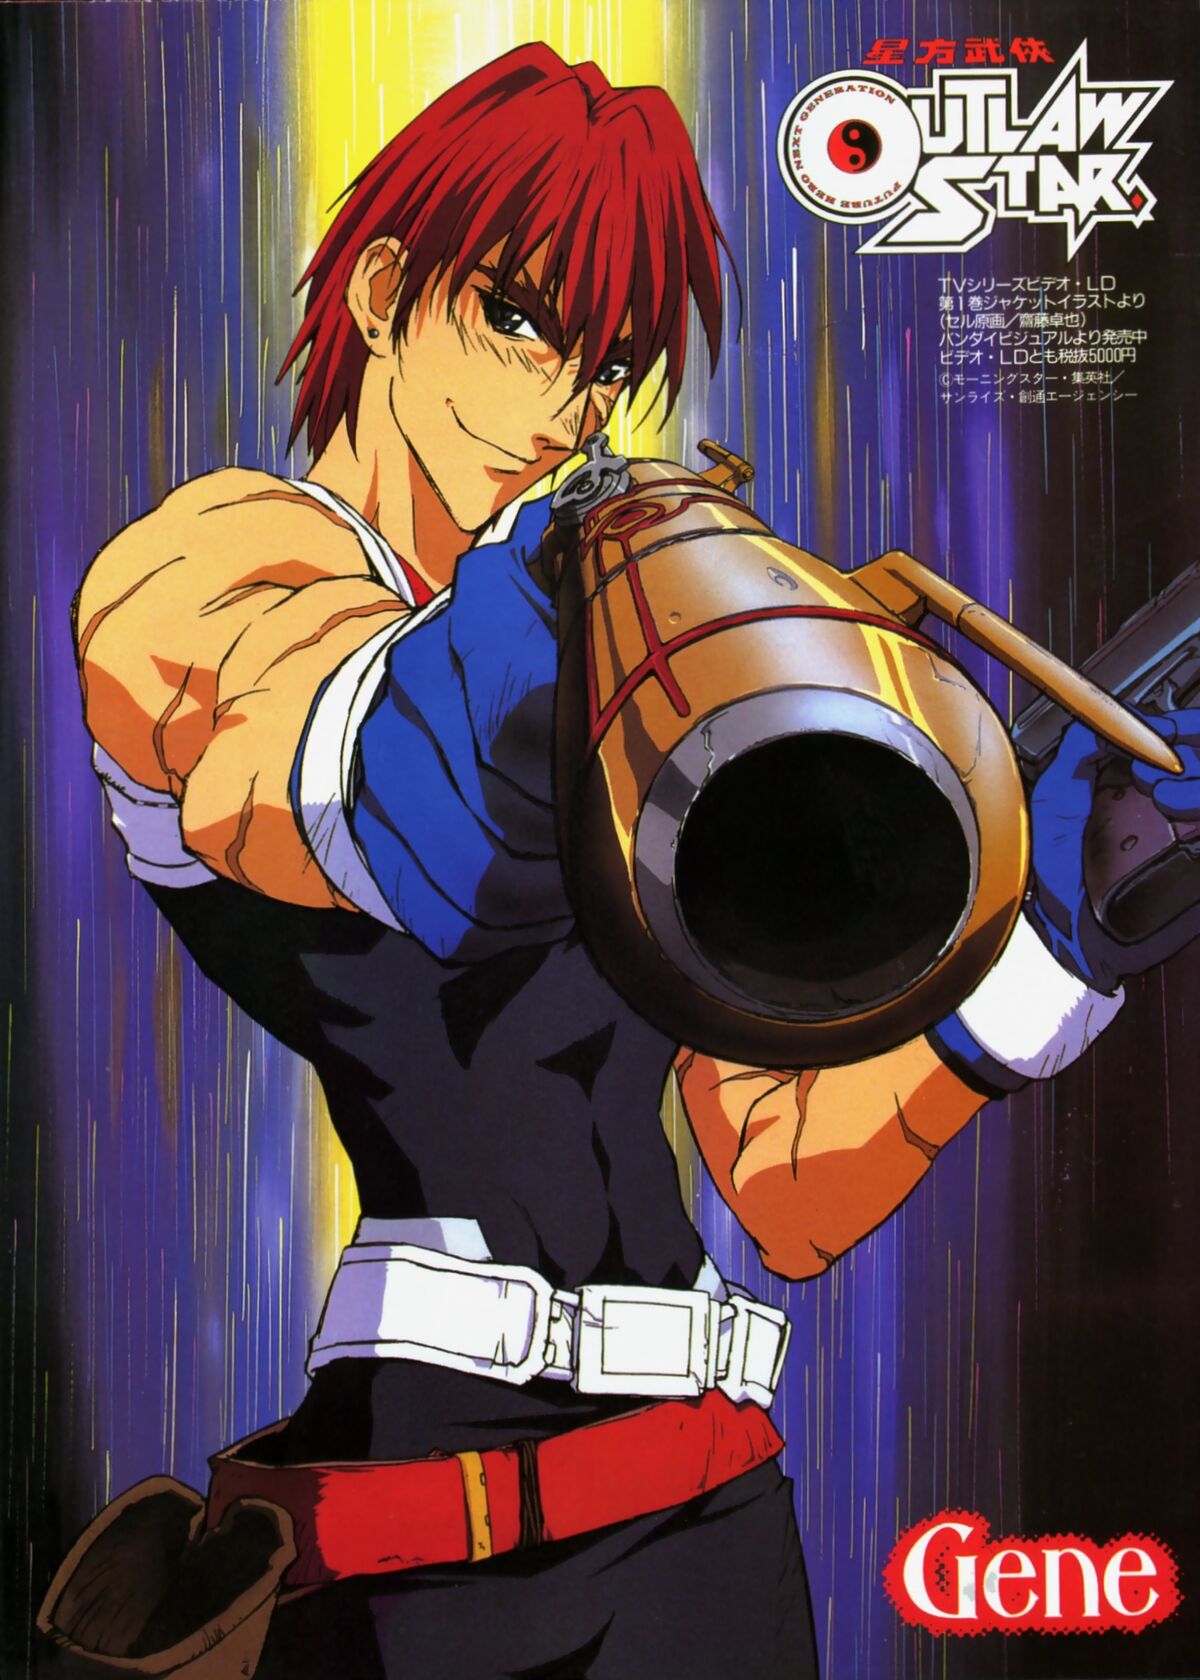 Outlaw Star - The Complete Series (Blu-ray) • Anime UK News